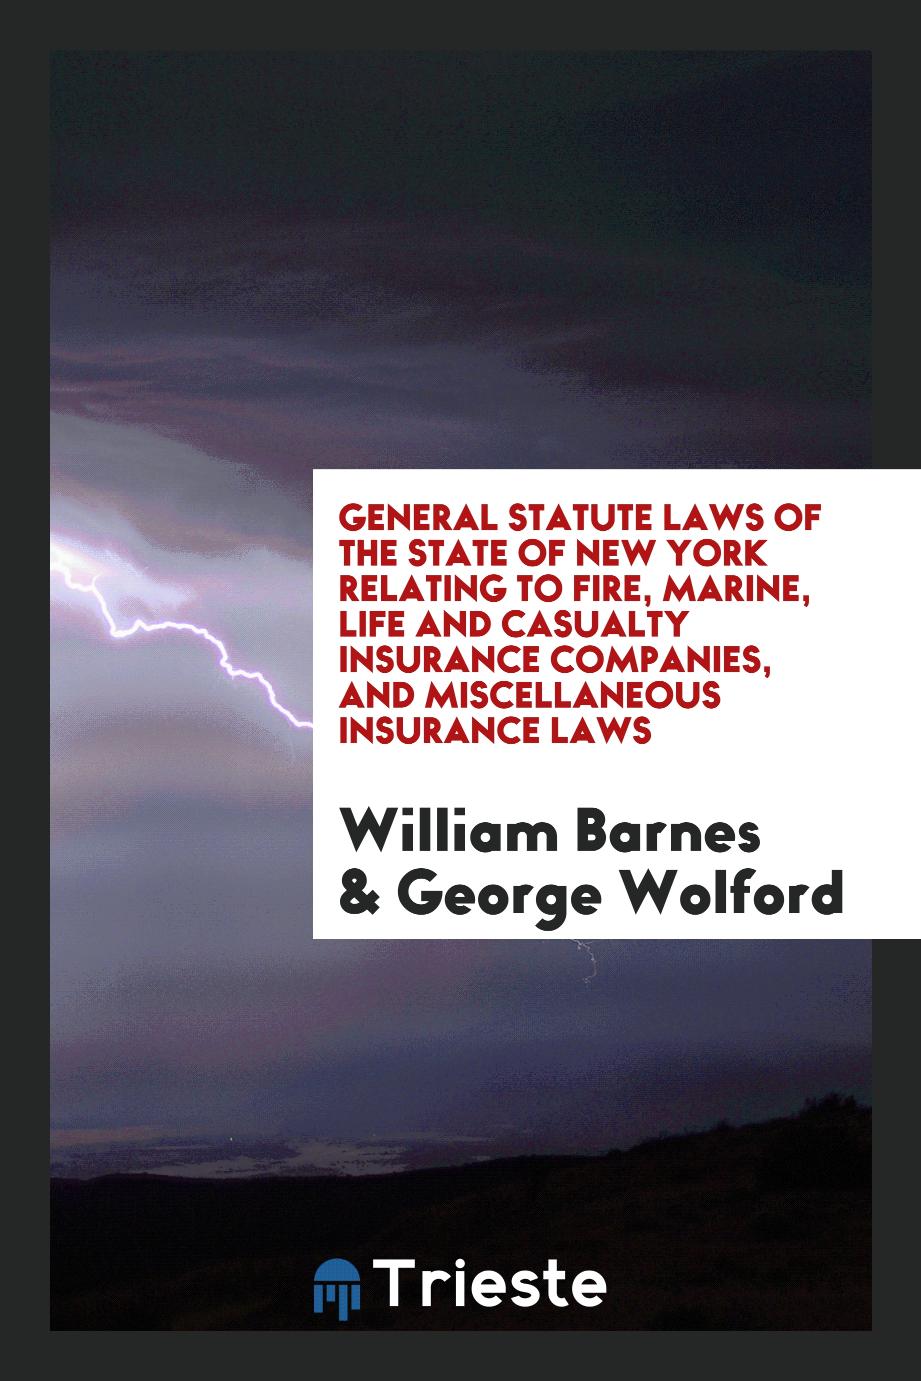 General Statute Laws of the State of New York Relating to Fire, Marine, Life and Casualty Insurance Companies, and Miscellaneous Insurance Laws